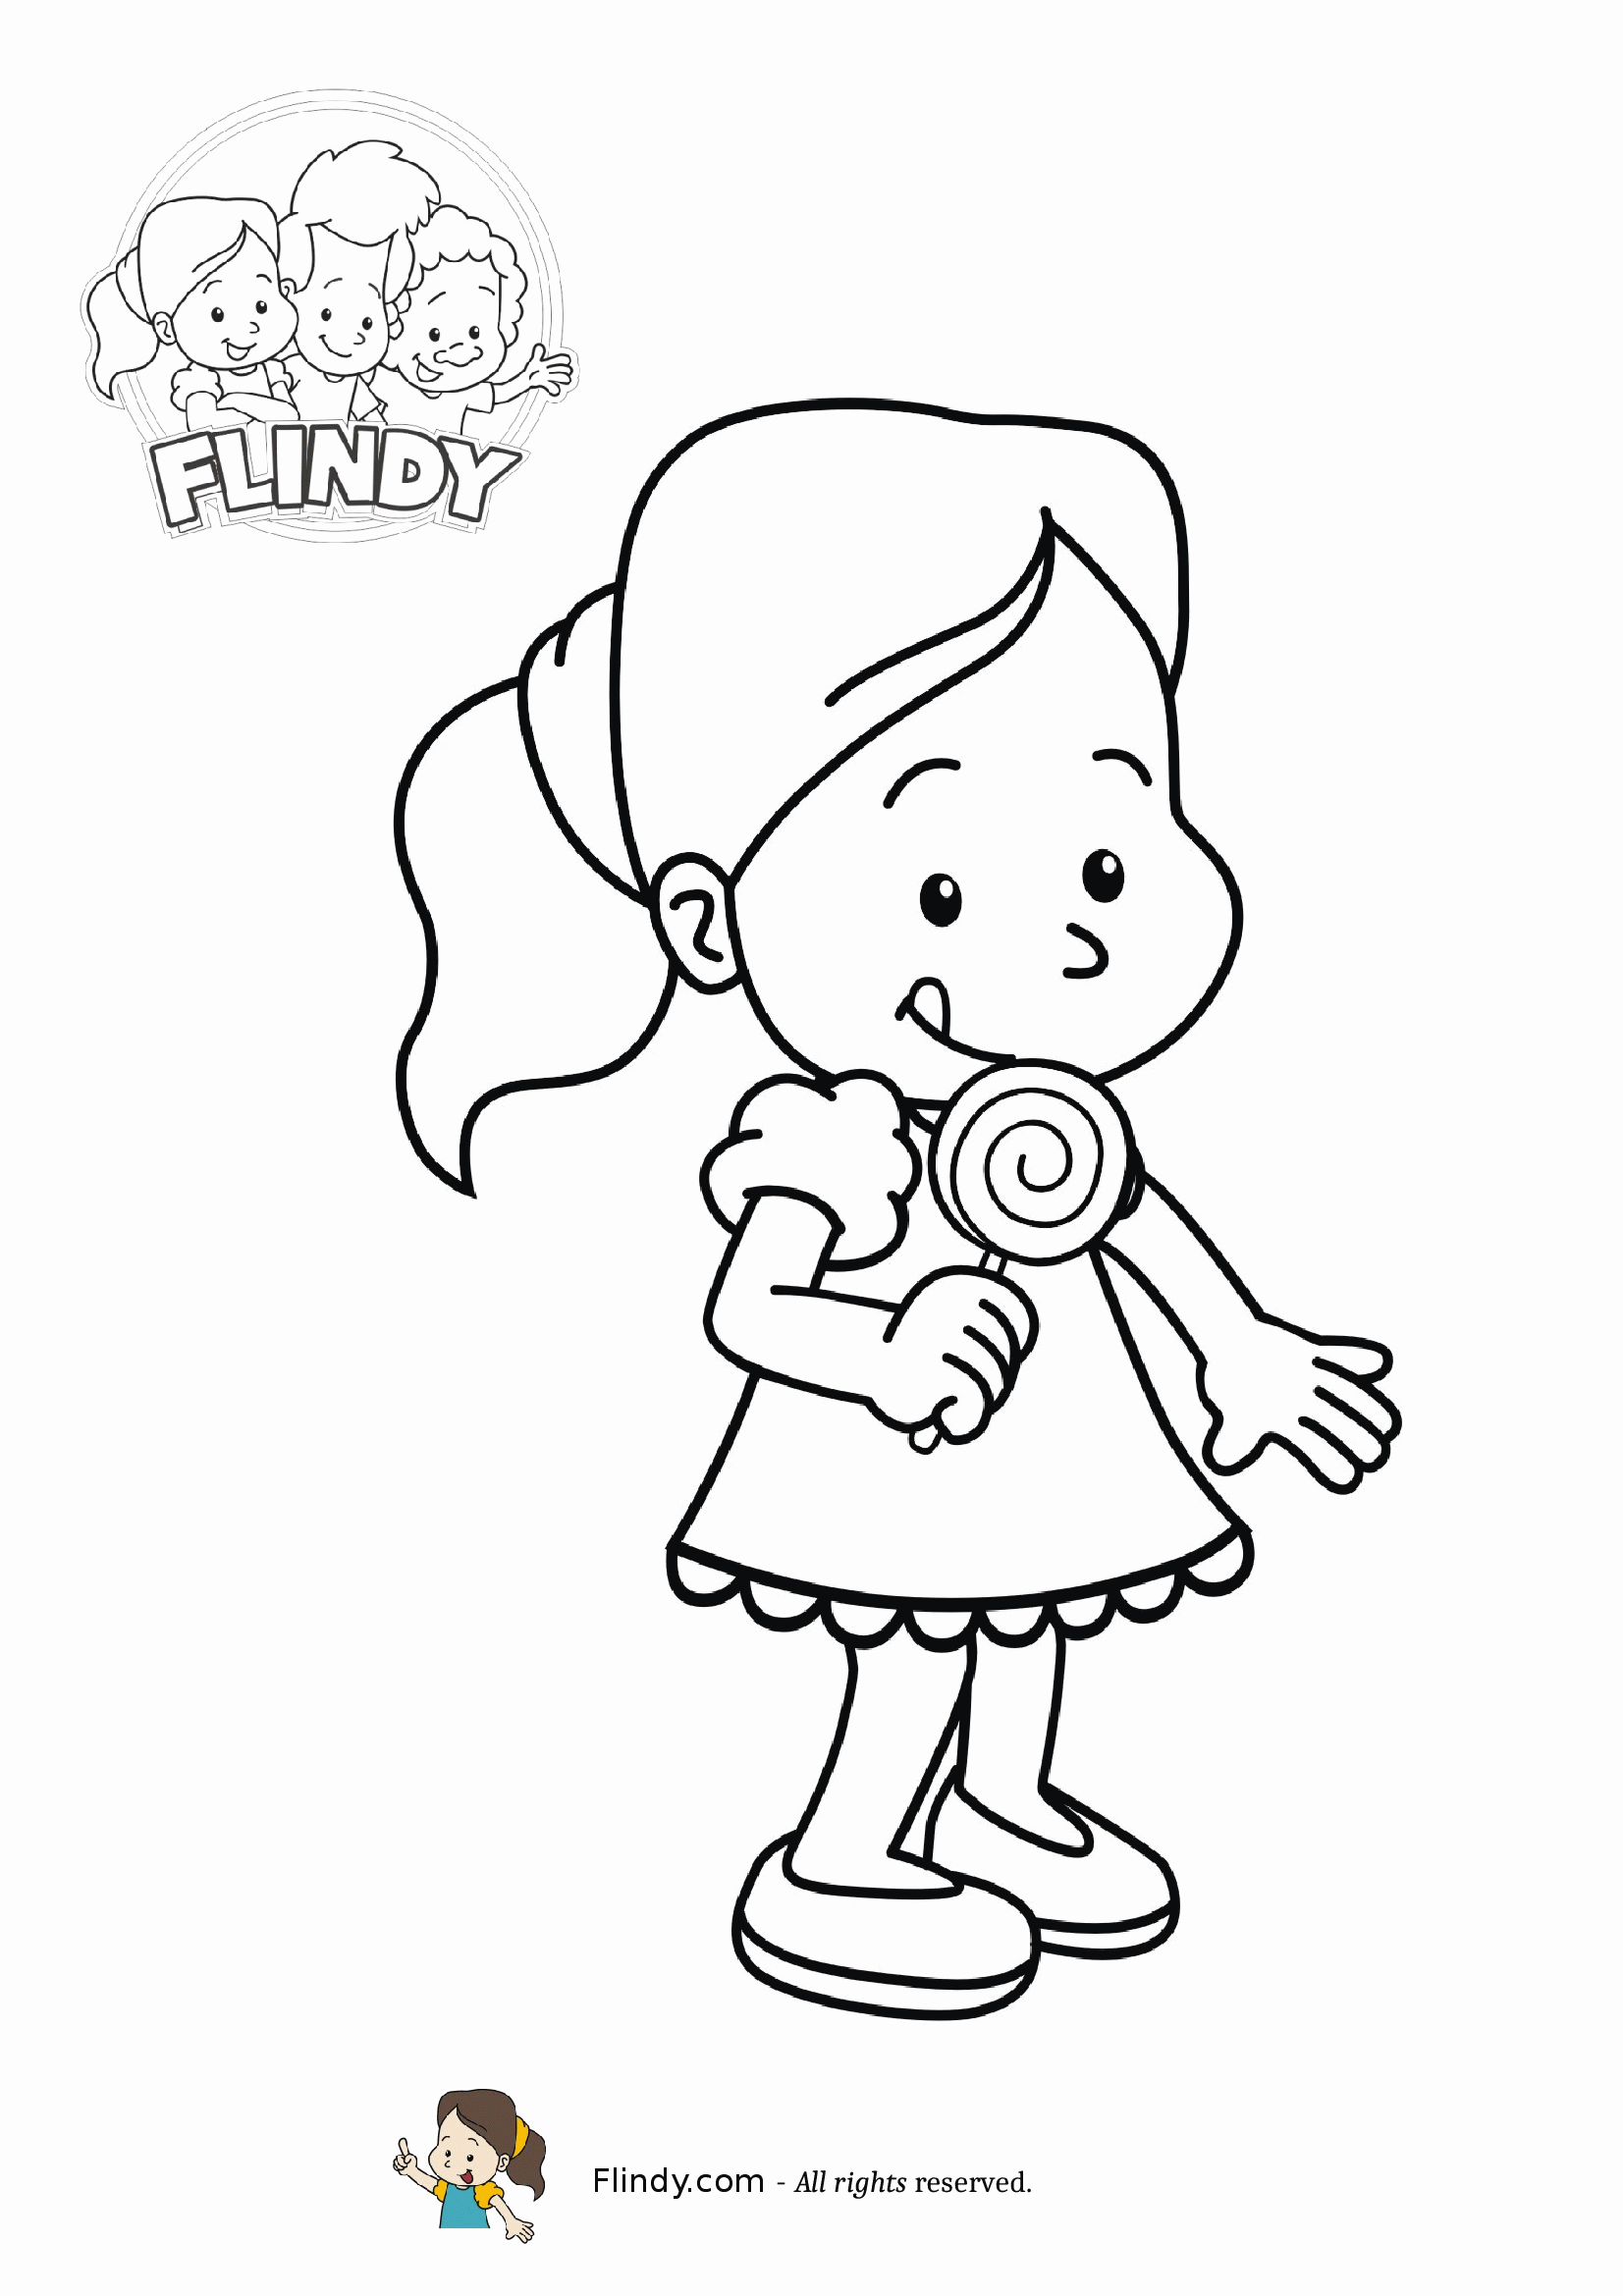 Free Printable Coloring Pages | Printable Worksheets & Activities